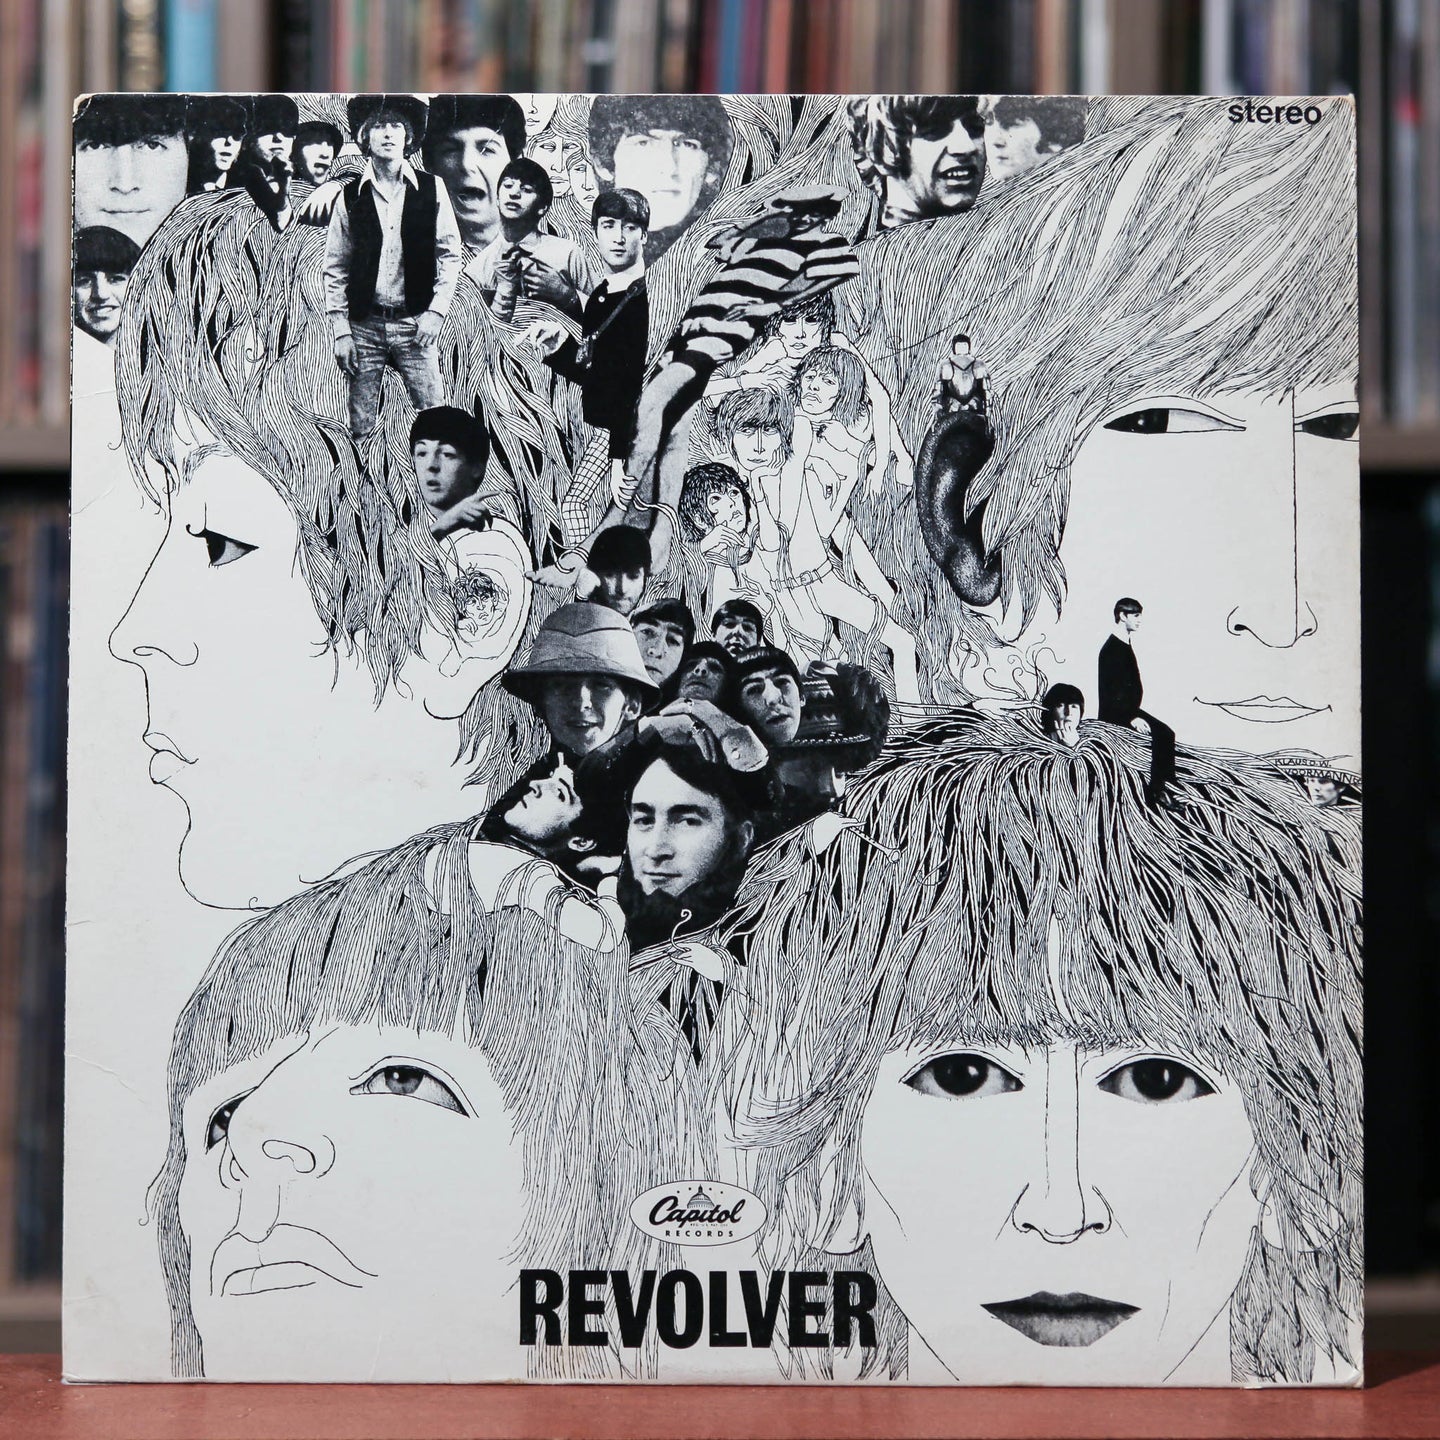 The Beatles - Revolver - 1970's Capitol VG+/VG+